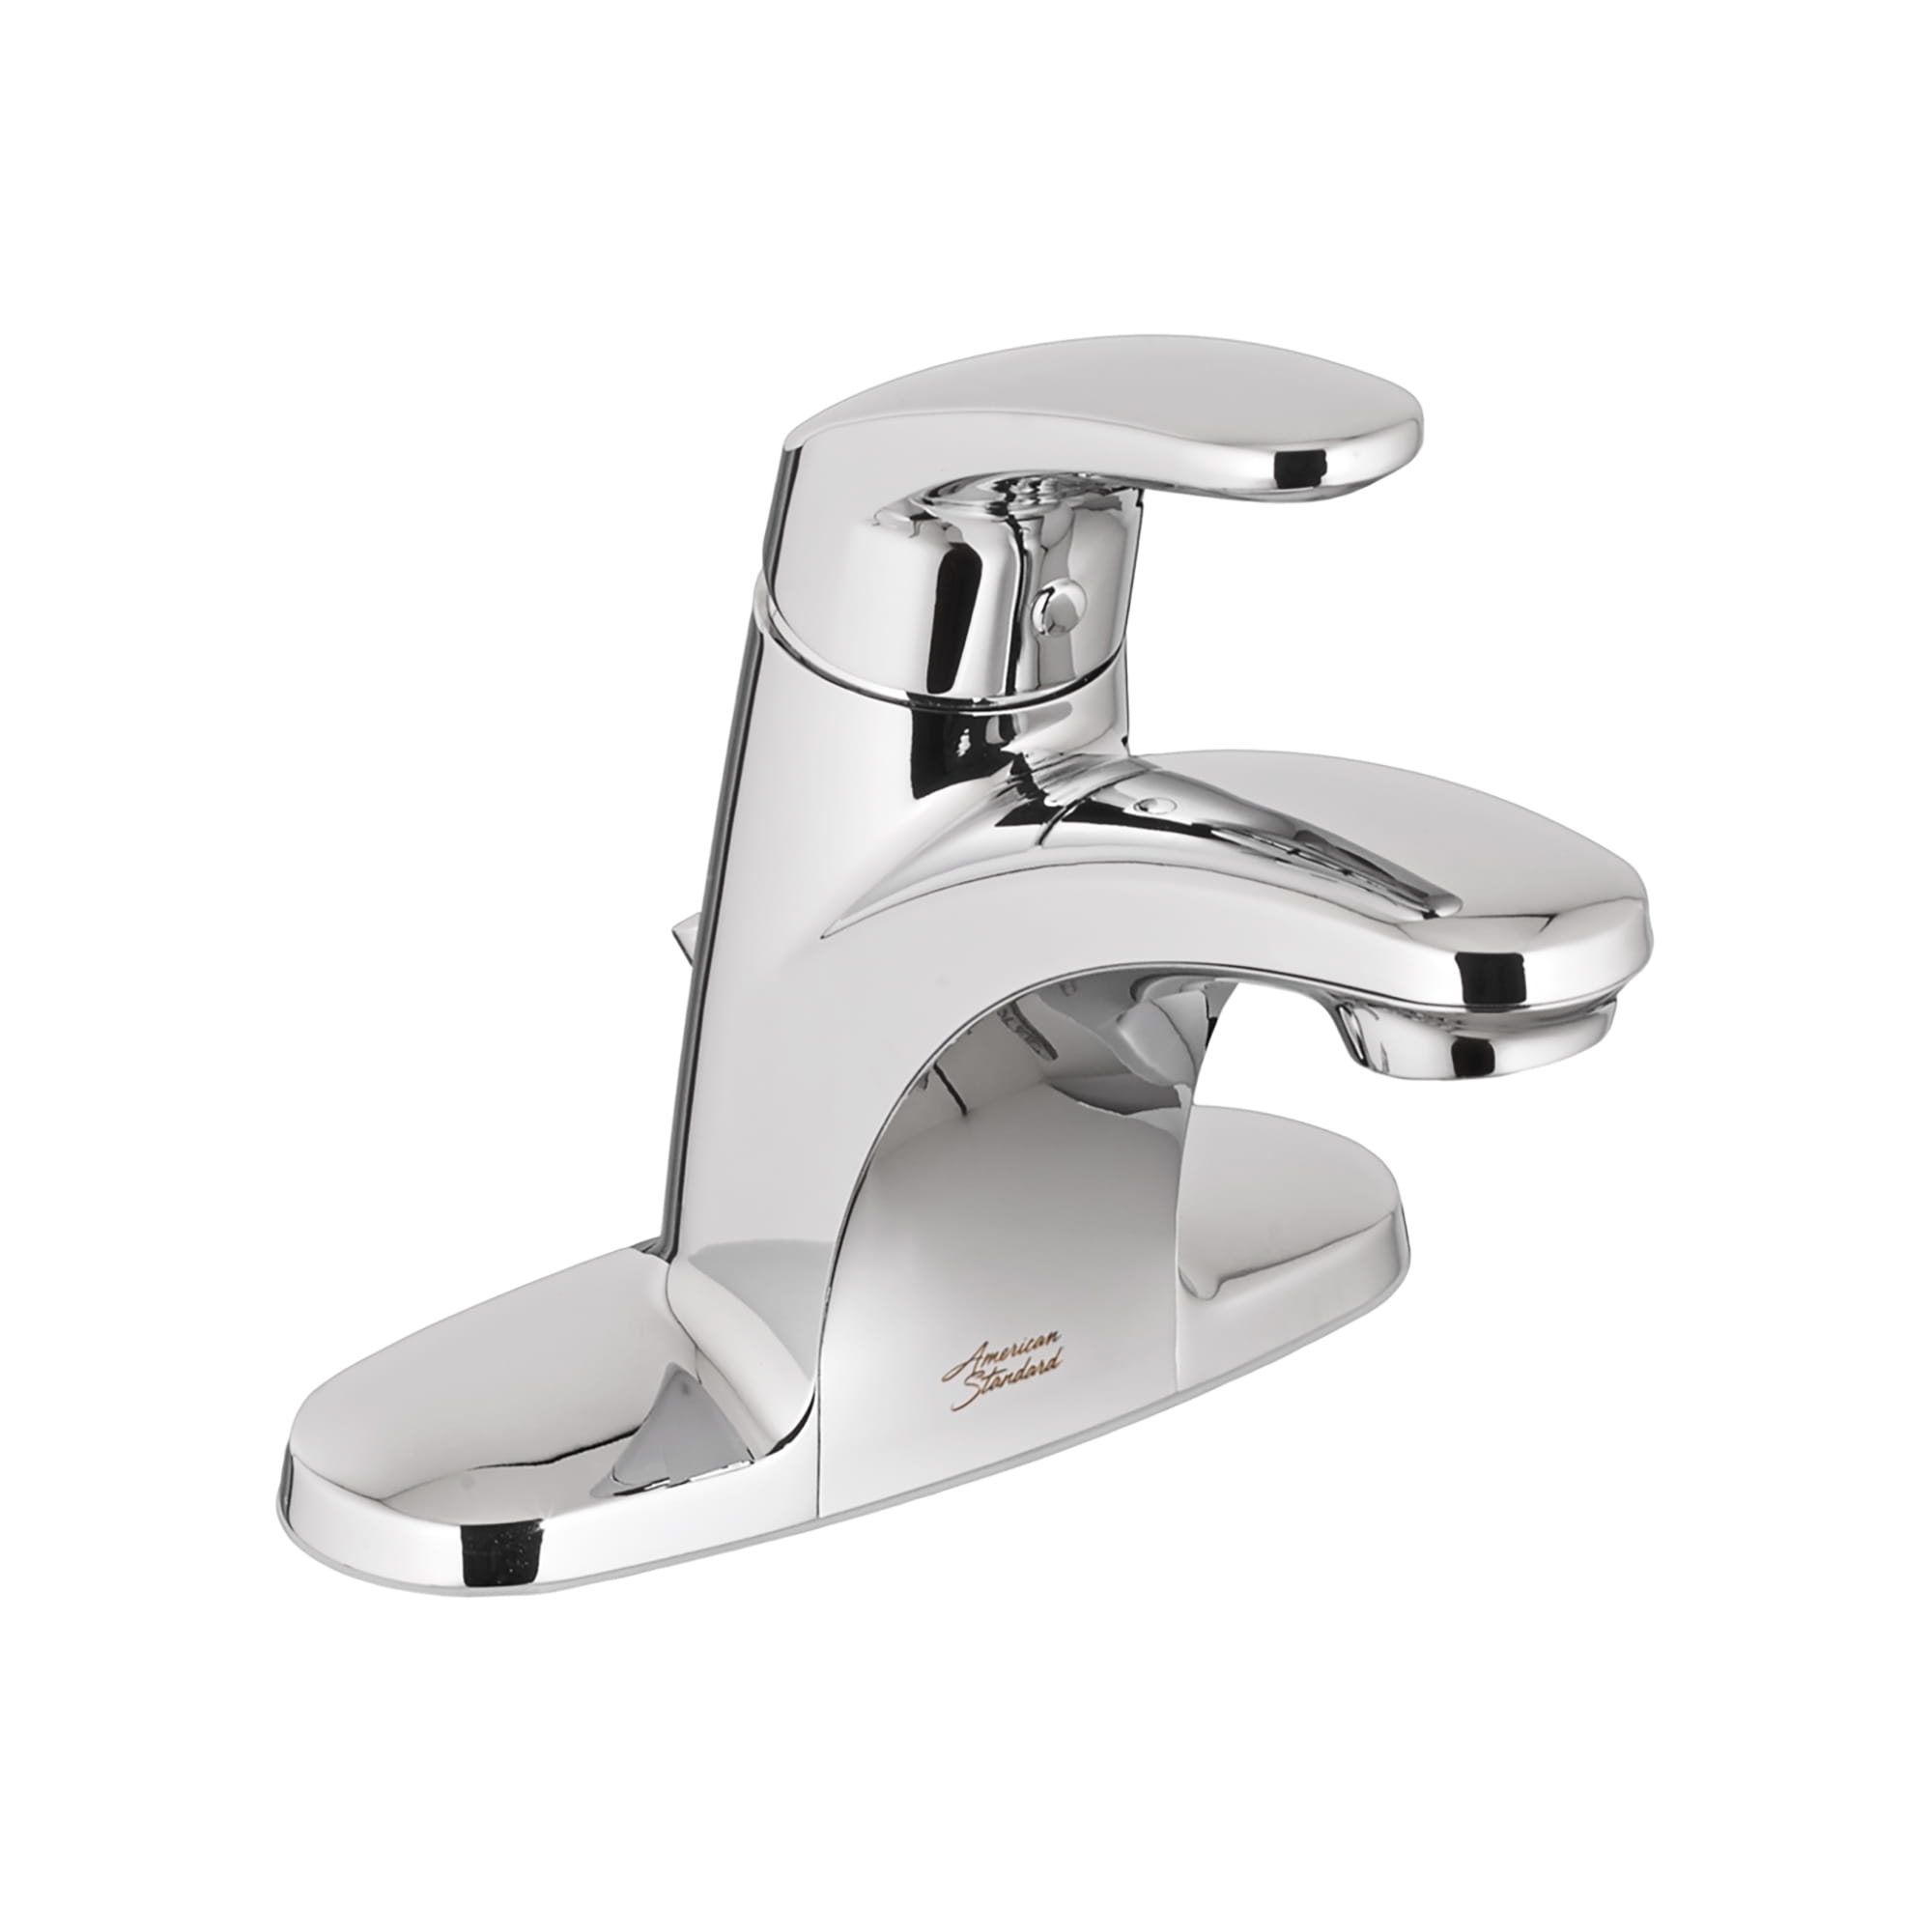 Colony PRO 4 Inch Centerset Single Handle Bathroom Faucet 05 gpm 19 L min With Lever Handle CHROME